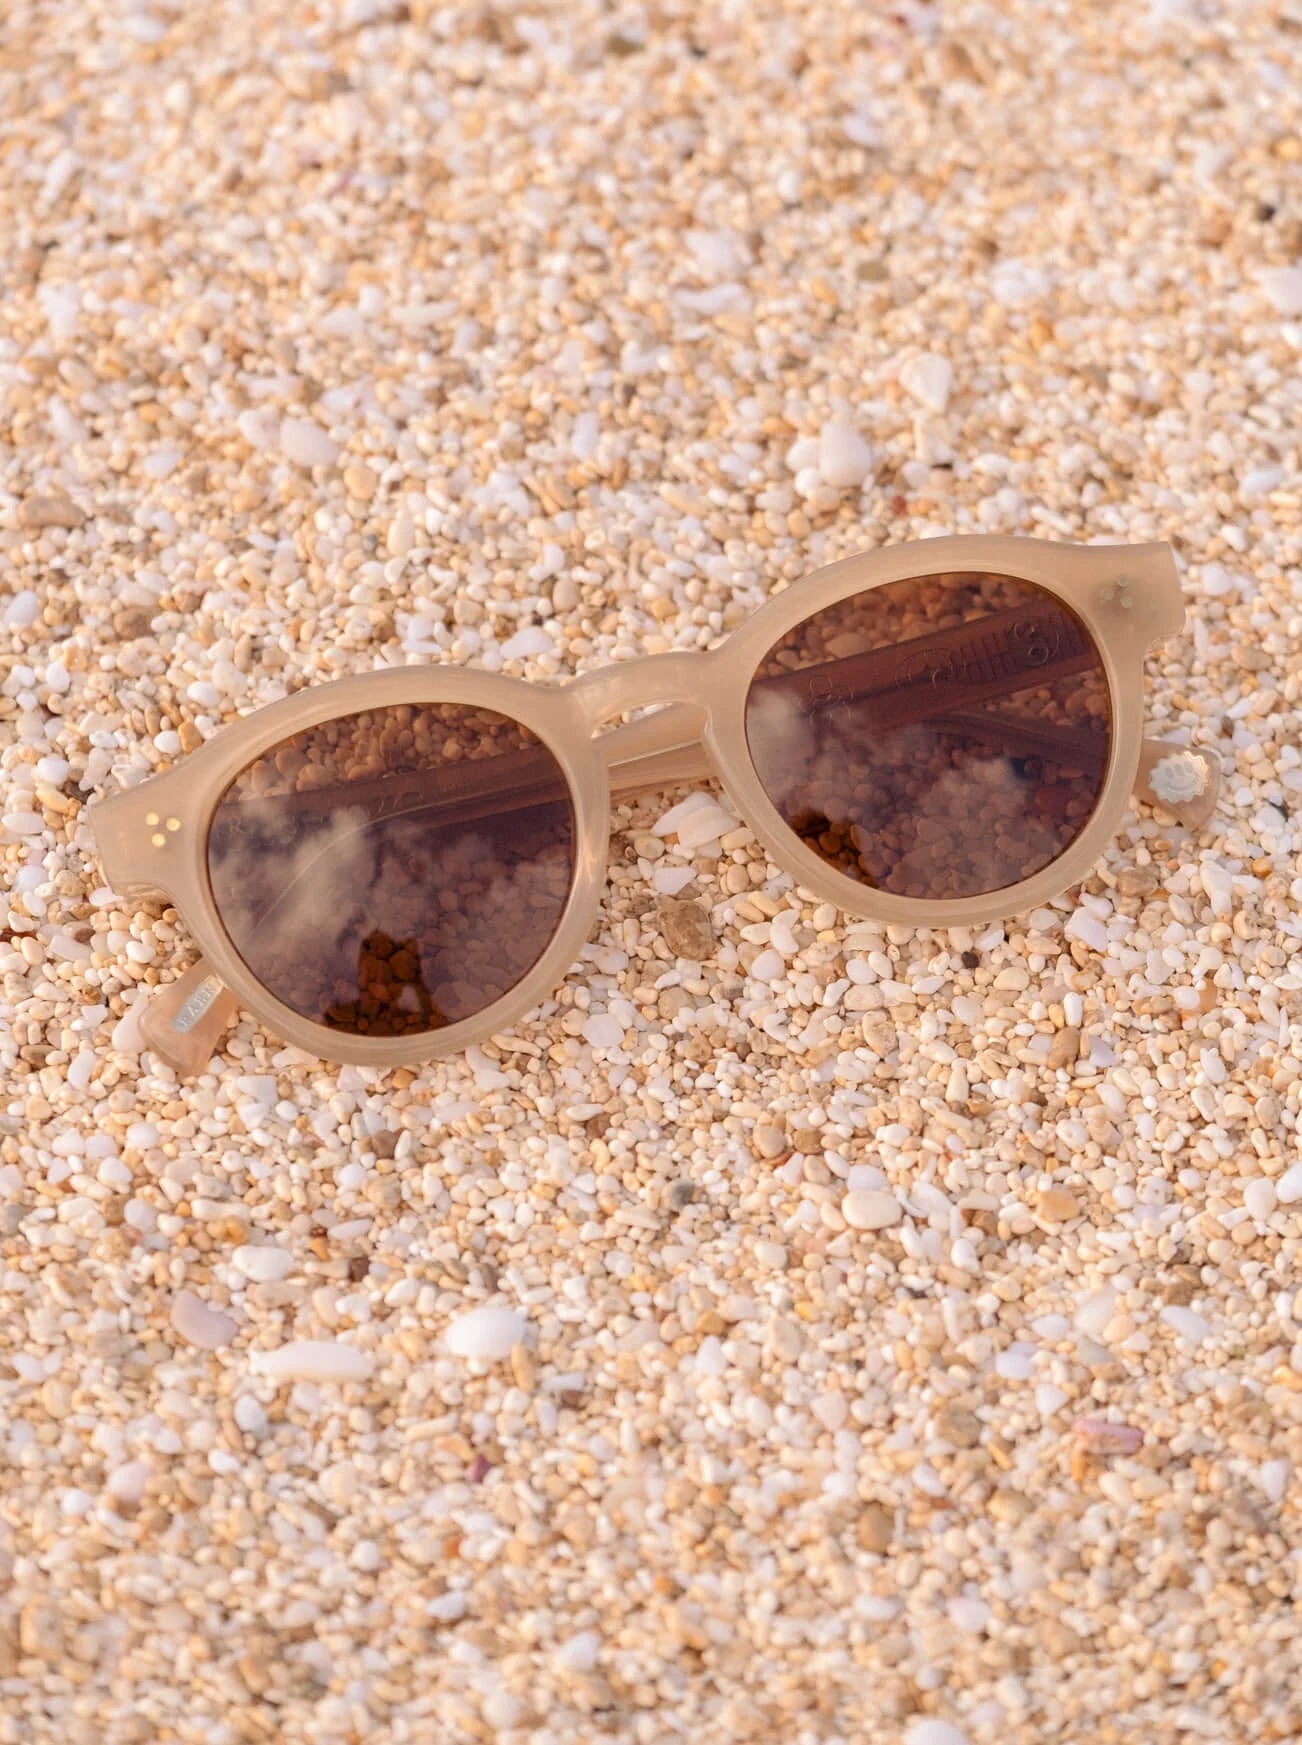 A pair of RAEN's Zelti Unisex Round Sunglasses with Villa frames and Vibrant Brown lenses